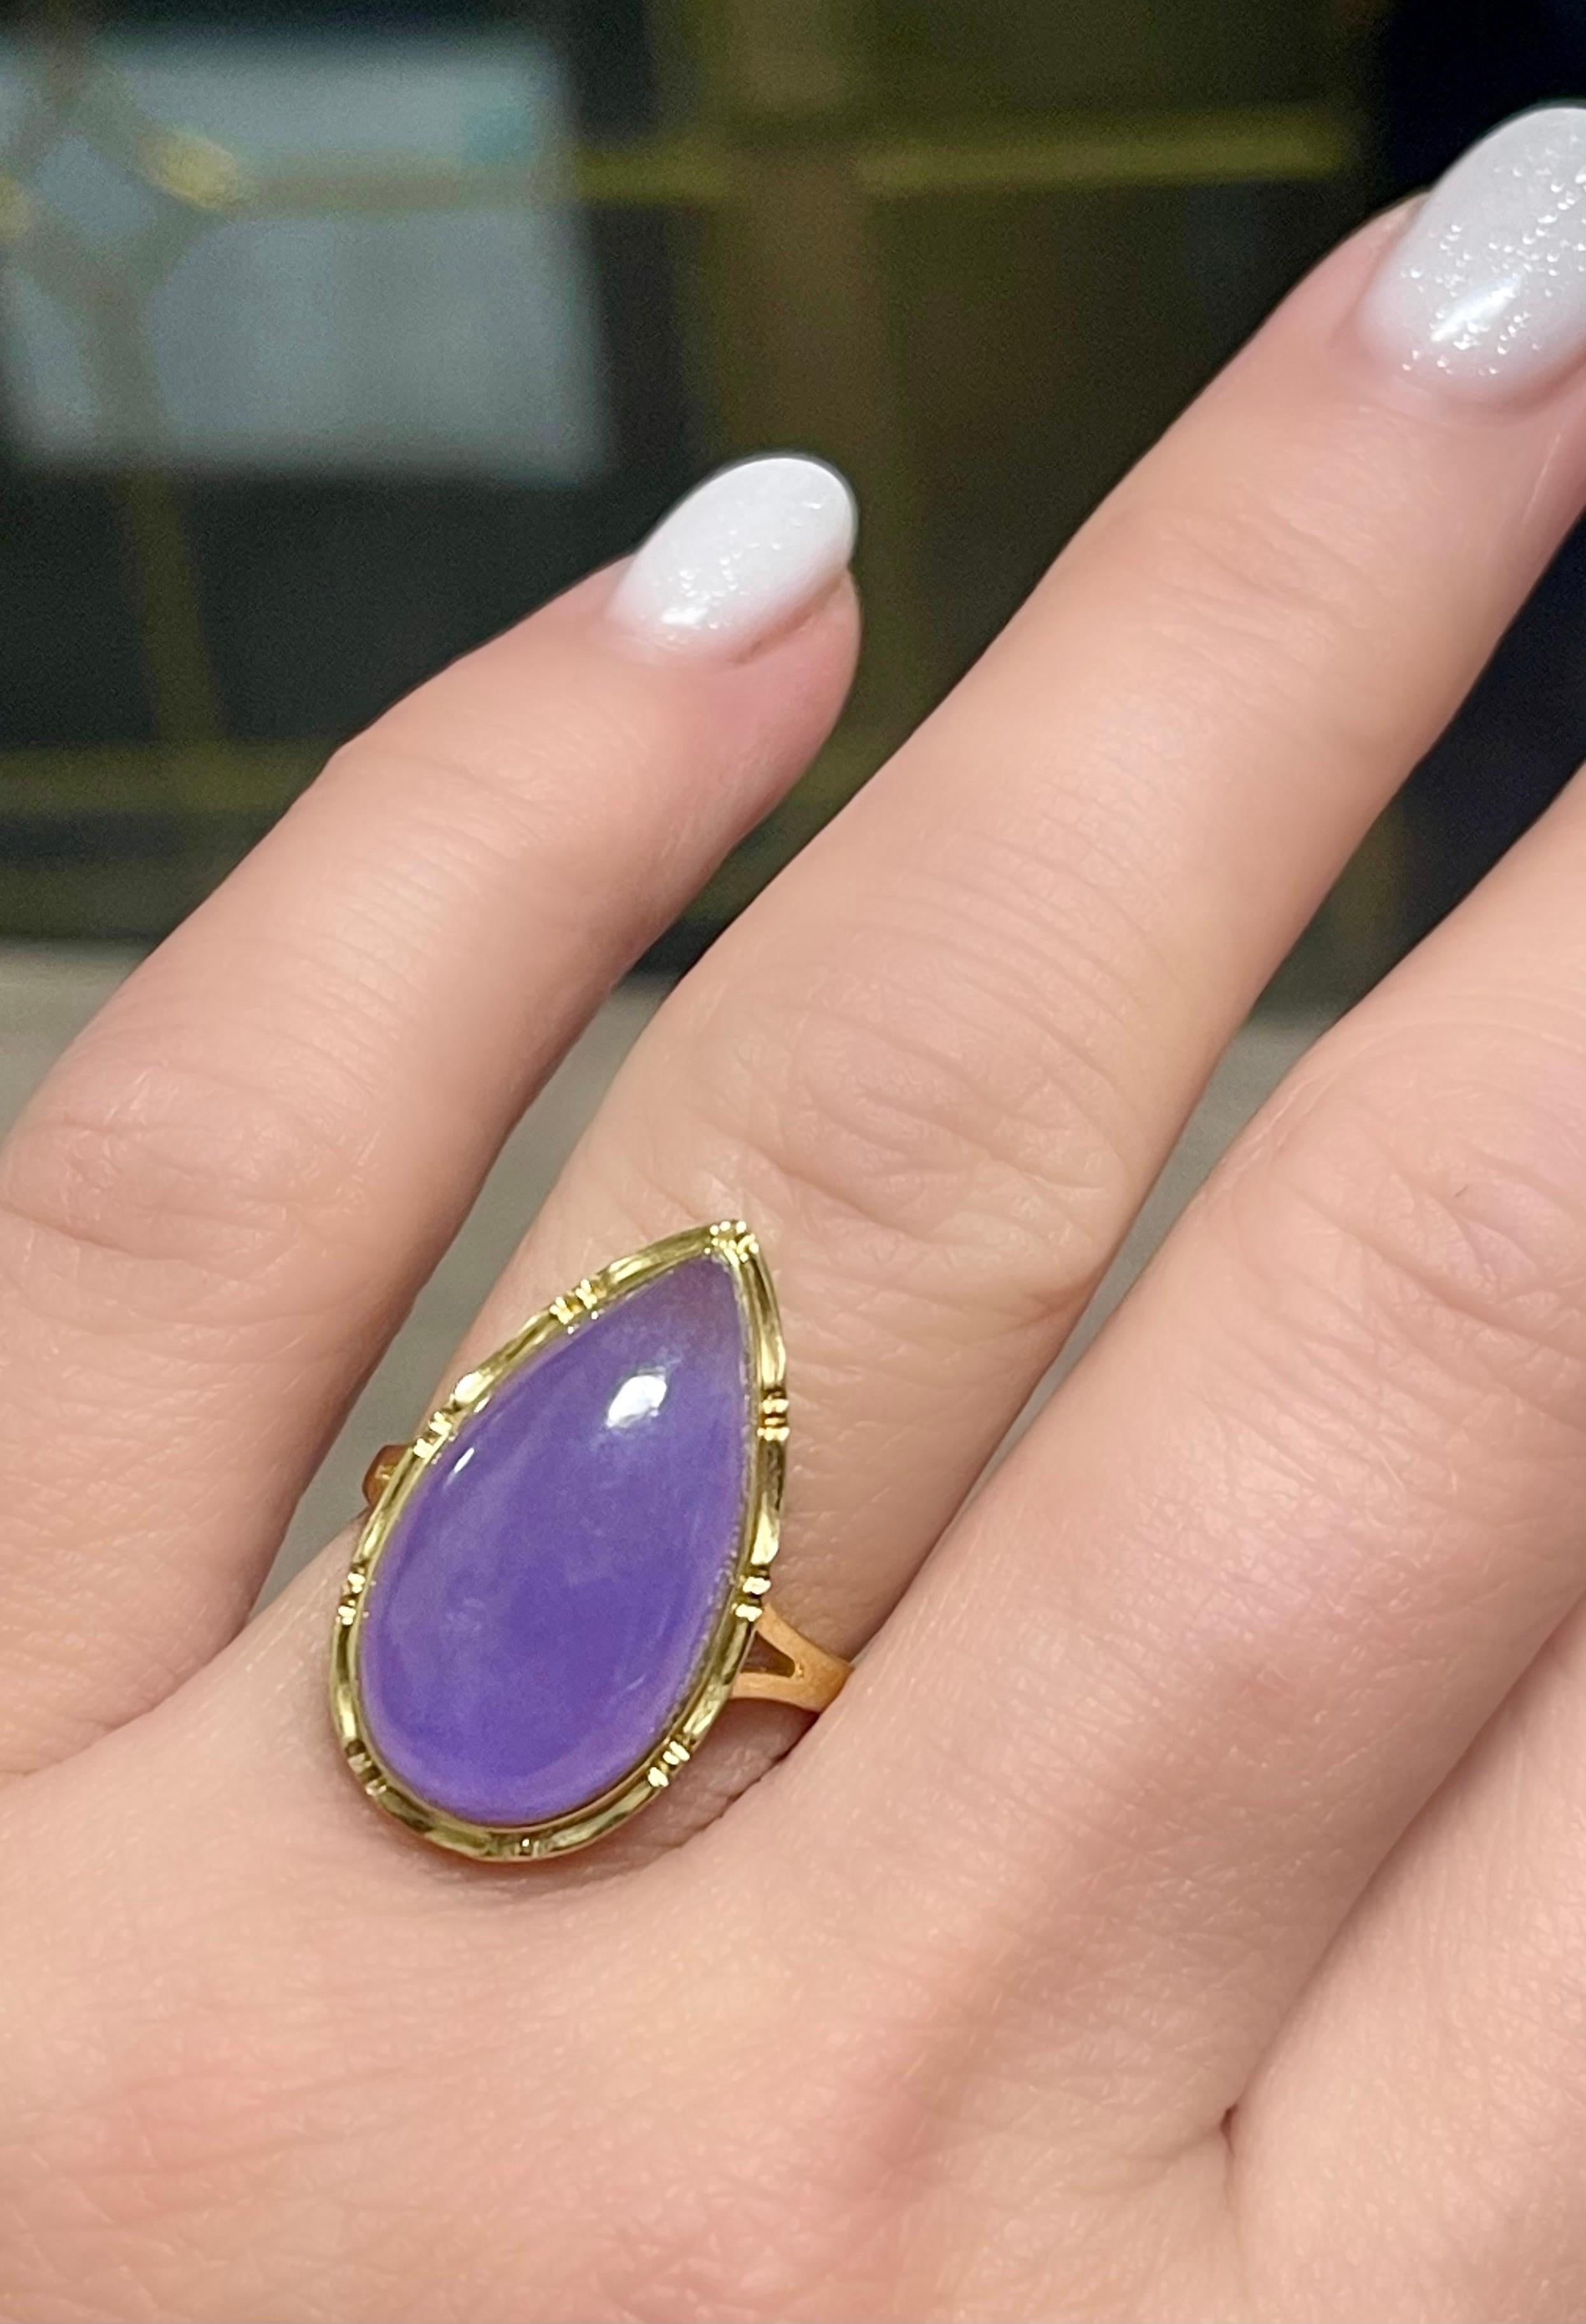 Amazing Pear Shaped Cabochon Amethyst Ring In 14k In Good Condition For Sale In Fort Lauderdale, FL